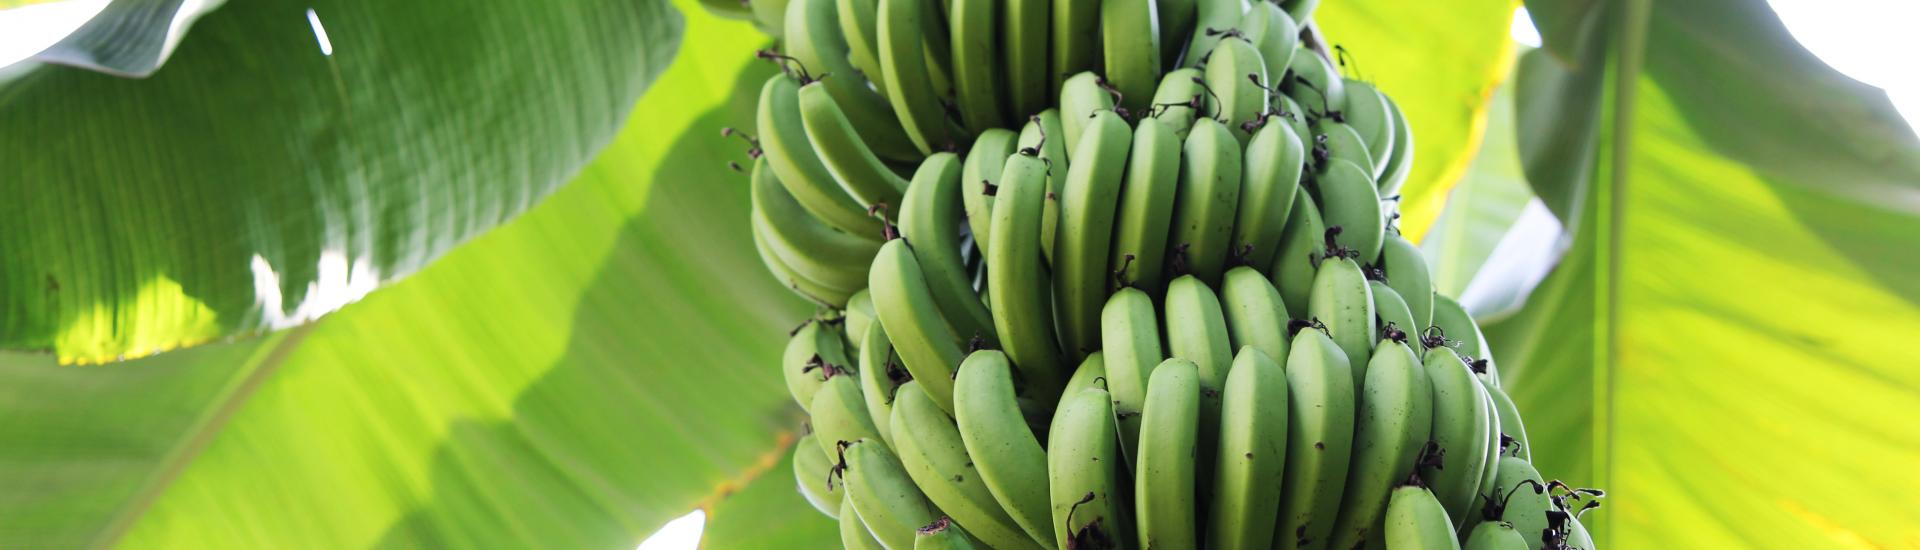 Bananas growing from tree